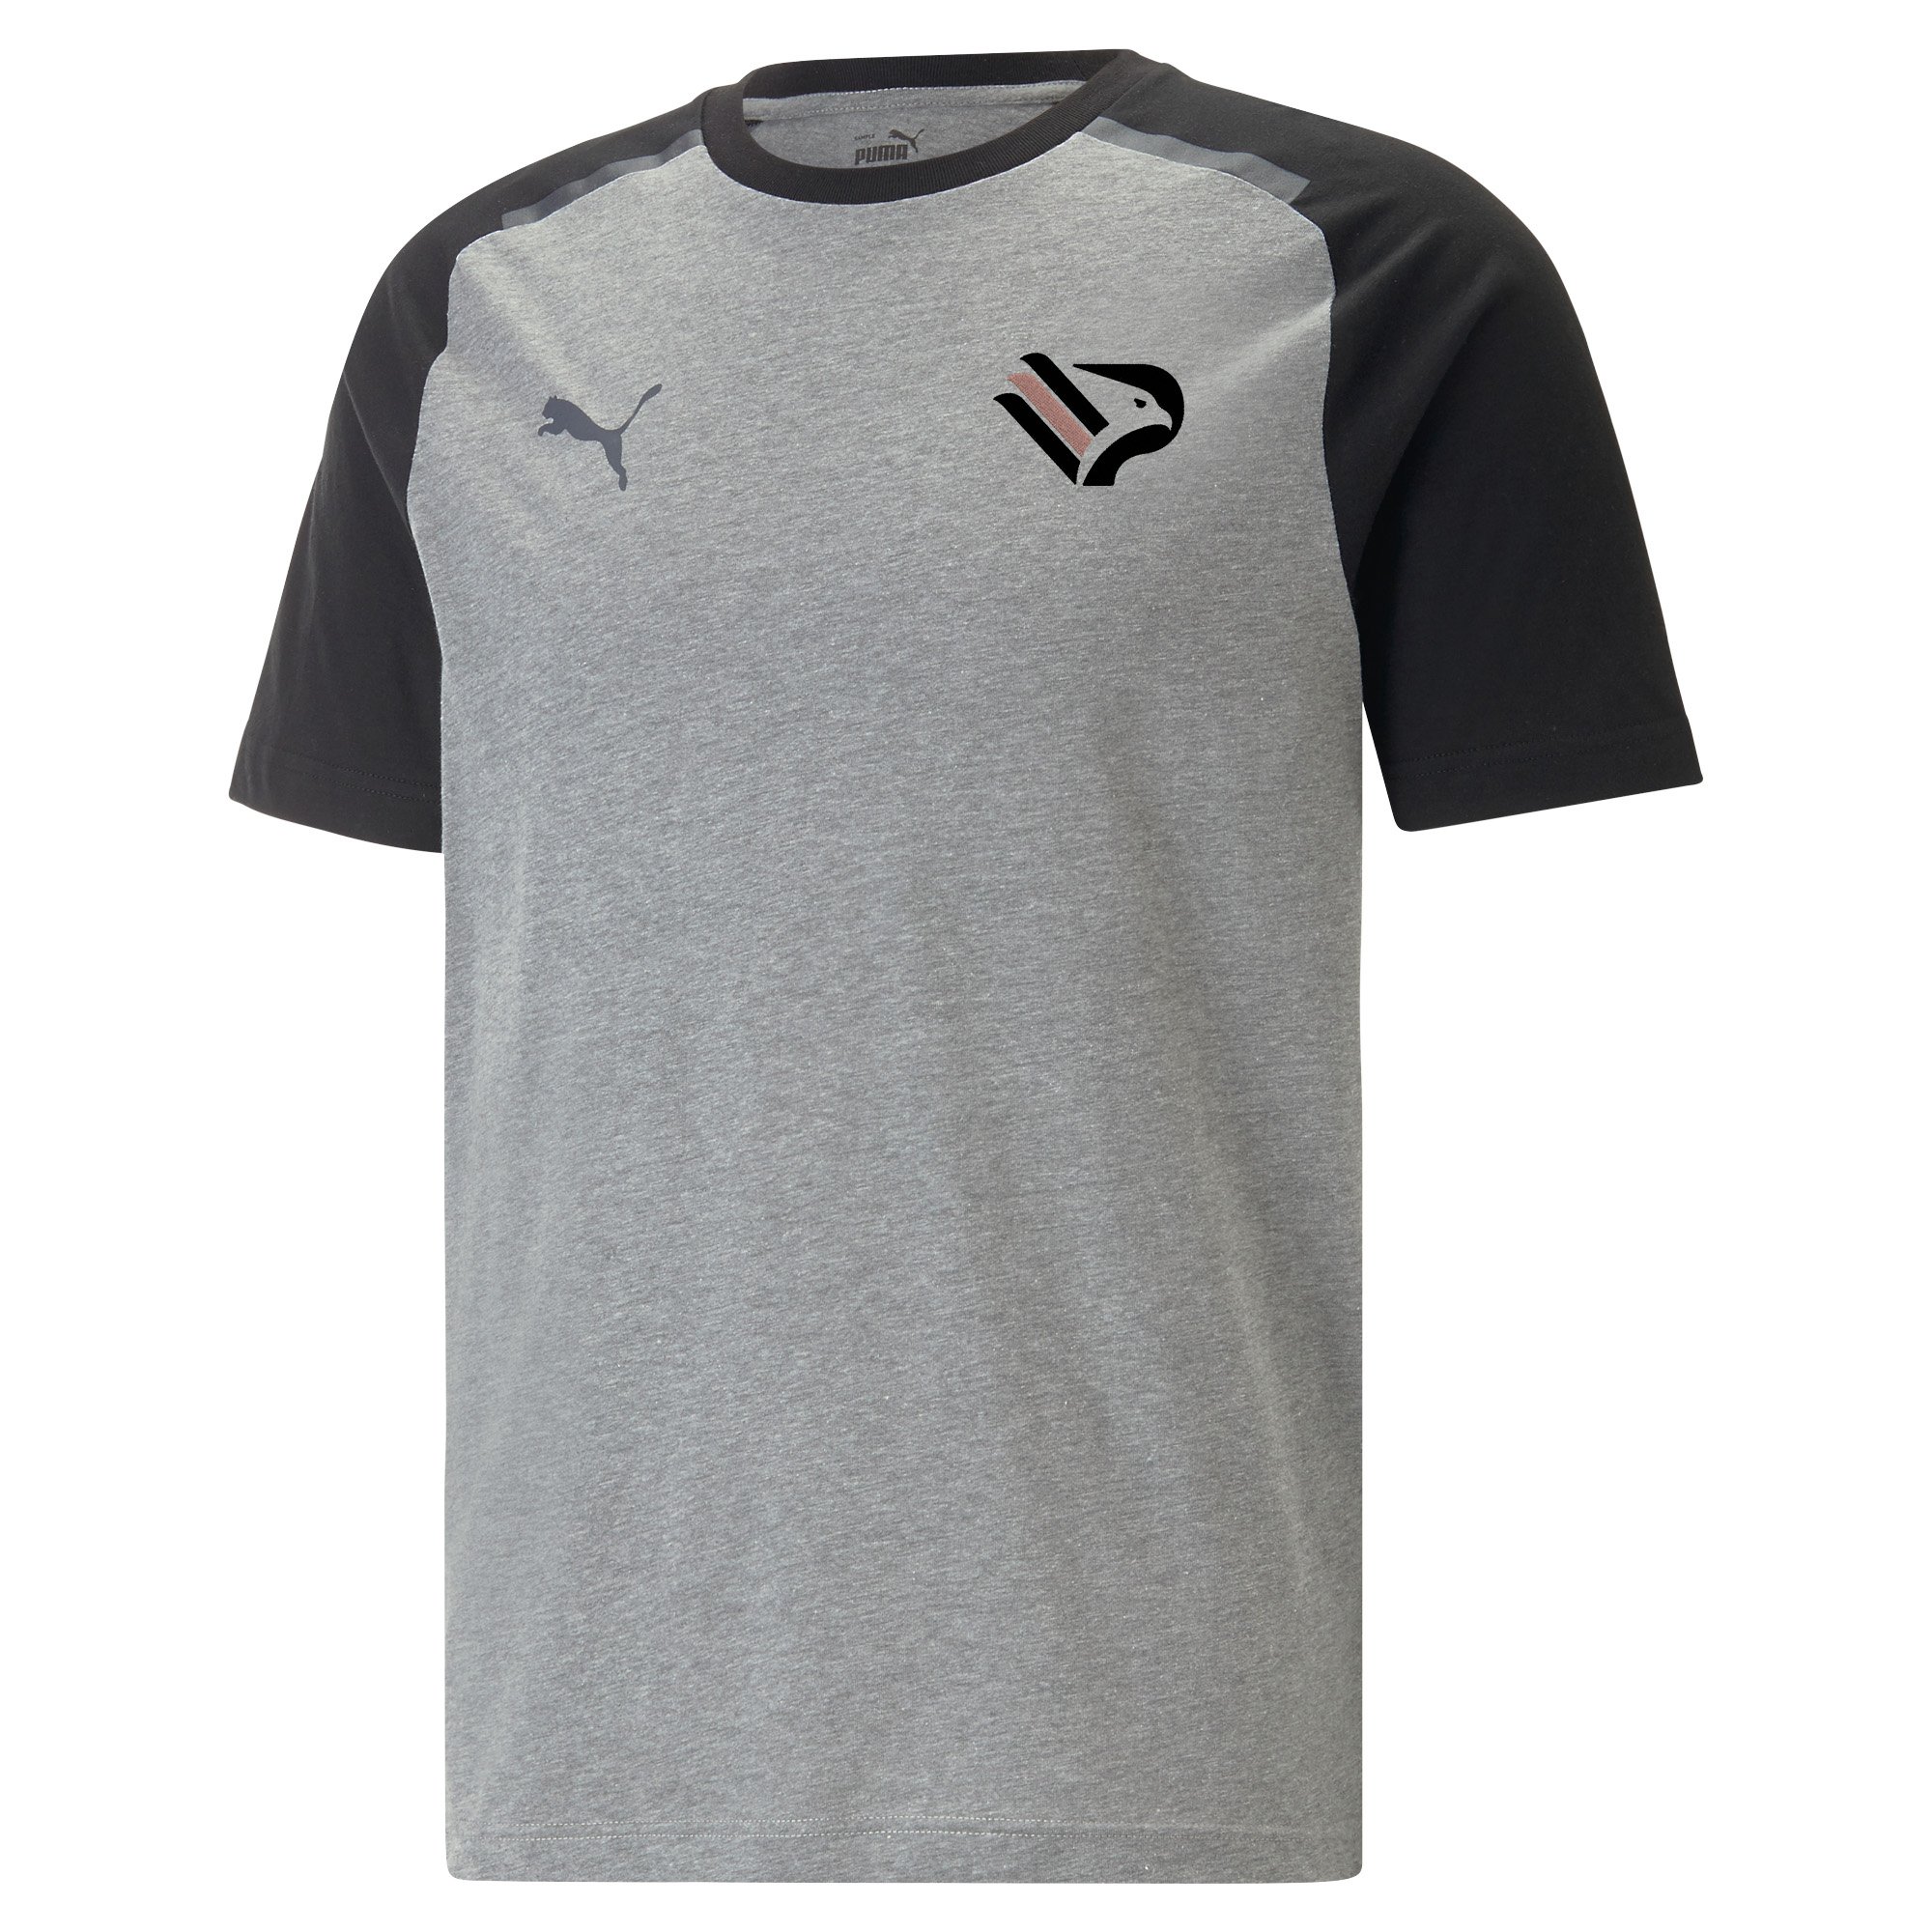 Training Kit Team - Palermo F.C. Official Store